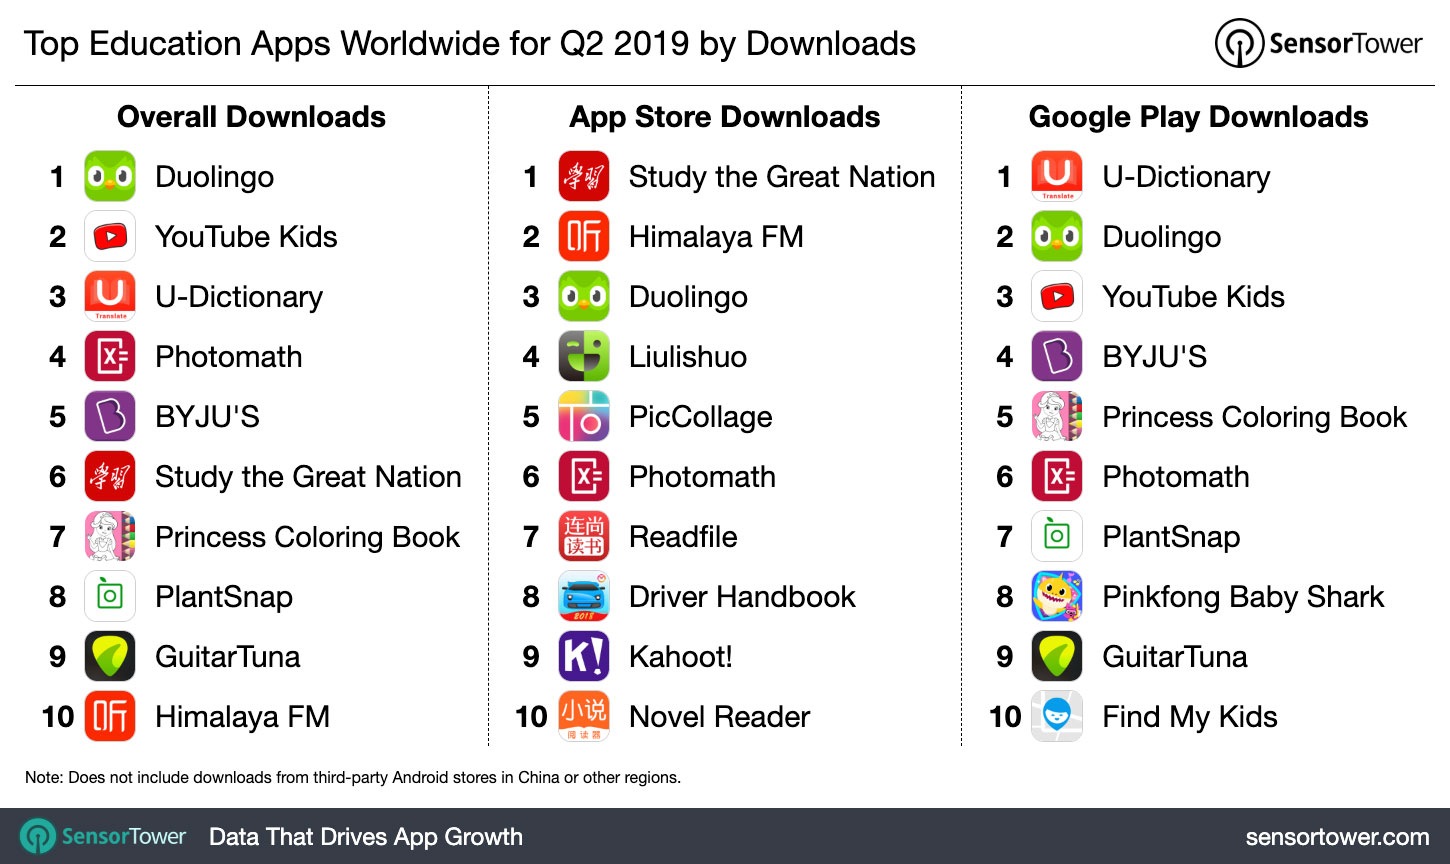 Top Education Category Apps Worldwide for Q2 2019 by Downloads